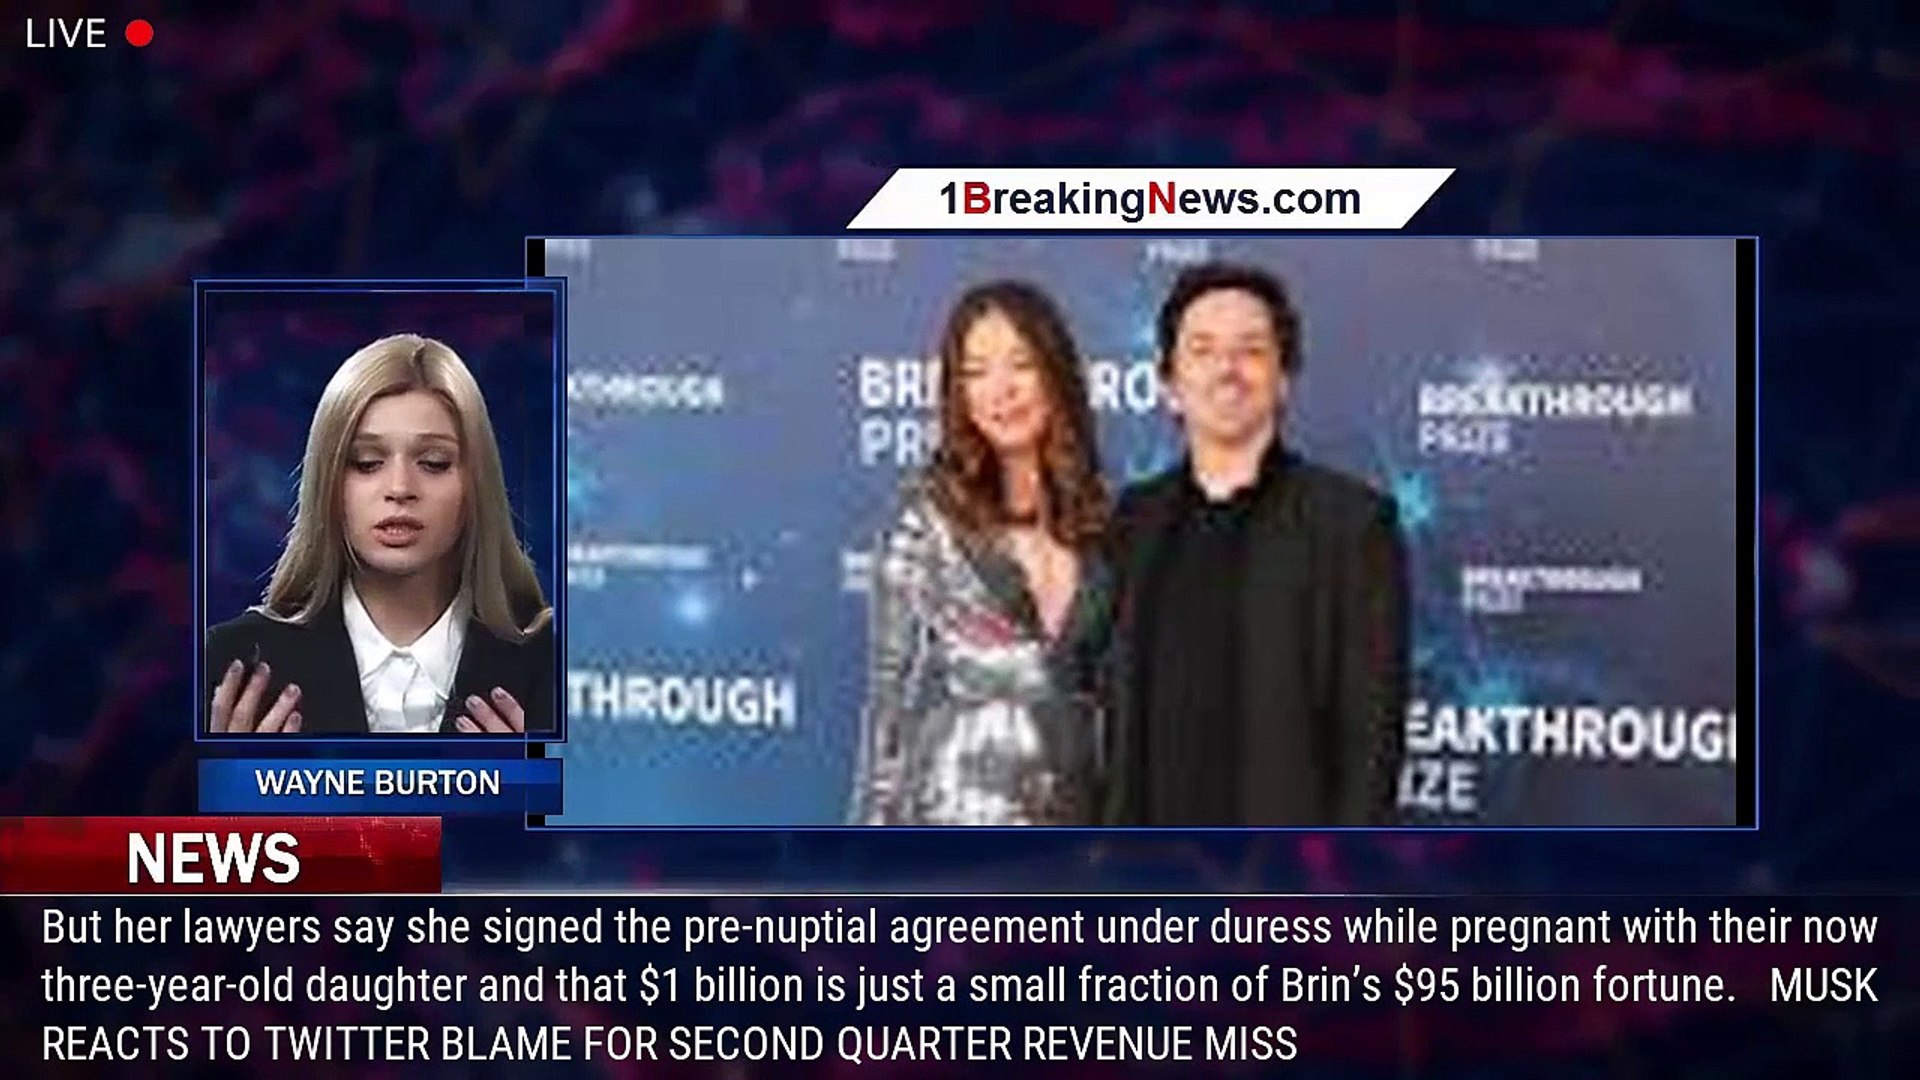 ⁣Elon Musk alleged affair with Google co-founder's wife prompted divorce: report - 1breakingnews